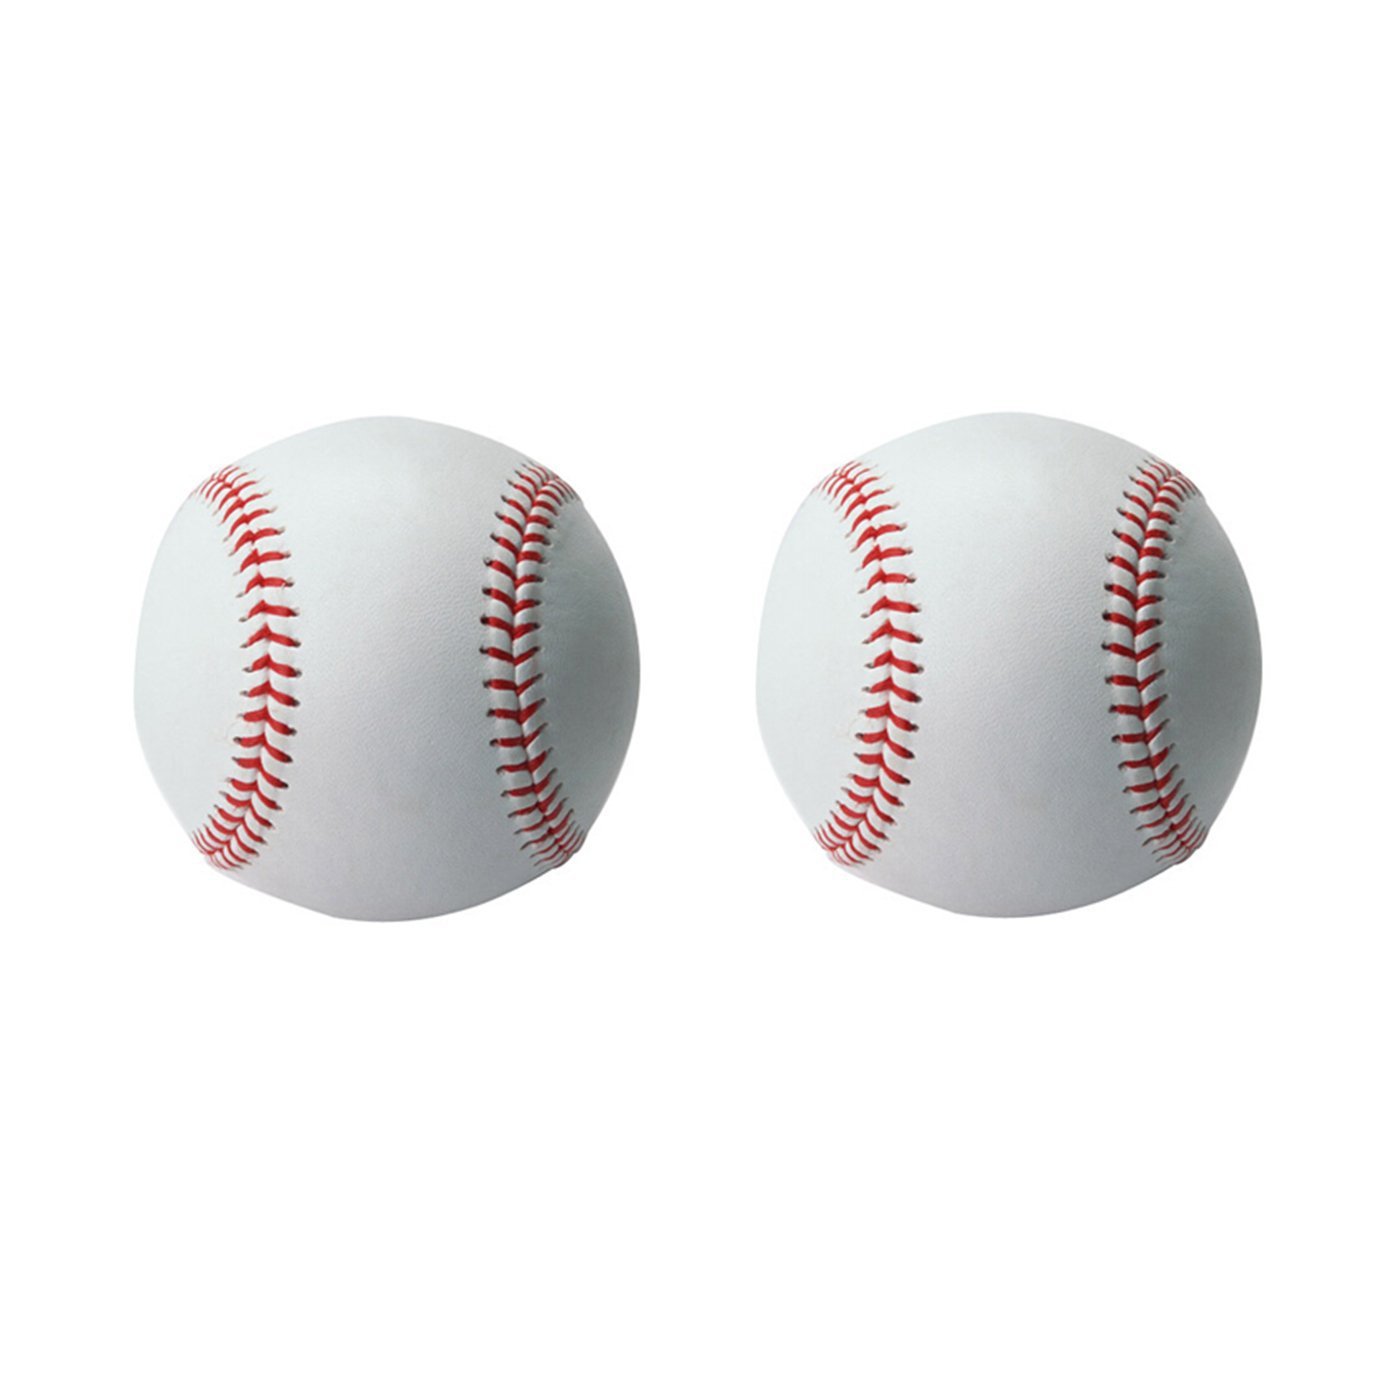 Soft Leather Sport Practice Training Base Softball 2 Pack 1167 A (Parcel Rate)